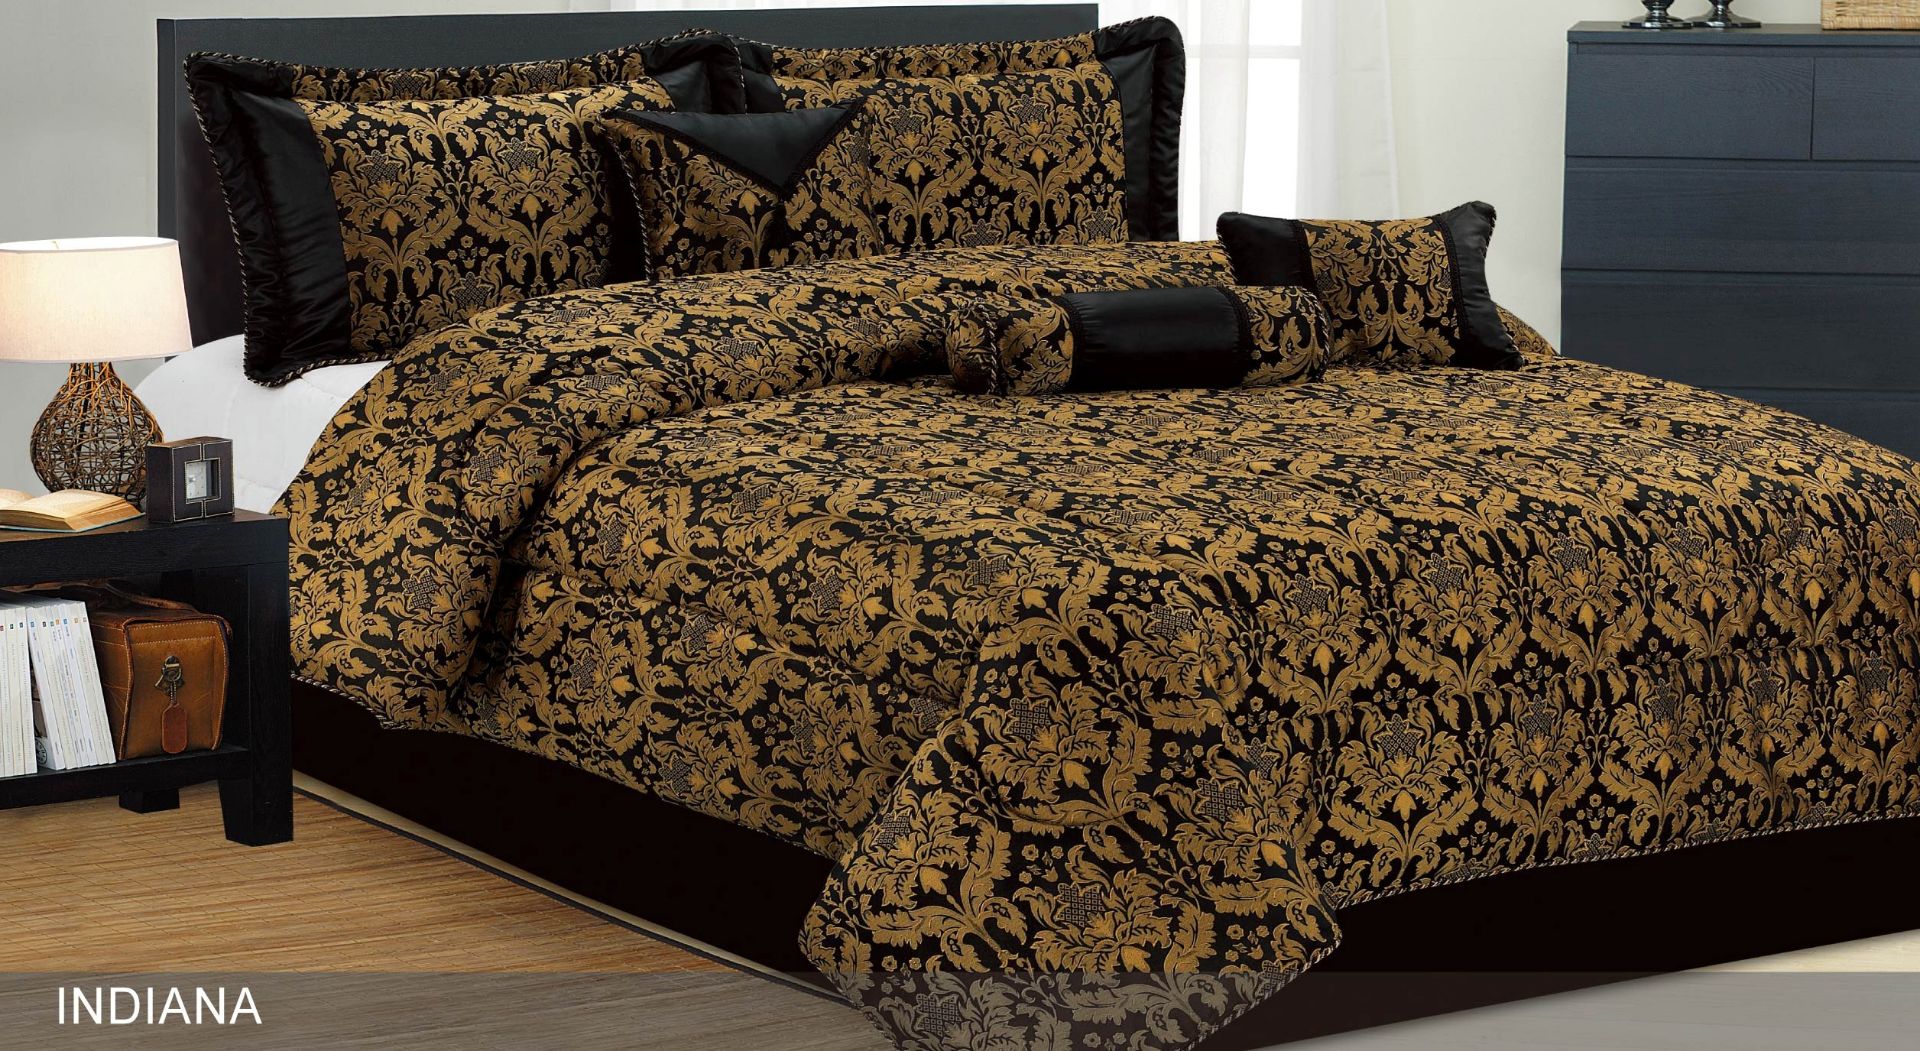 V Jacquard Seven Piece King Size Bed Set RRP129.99 To Include Bed Spread Valance Sheet Pillow